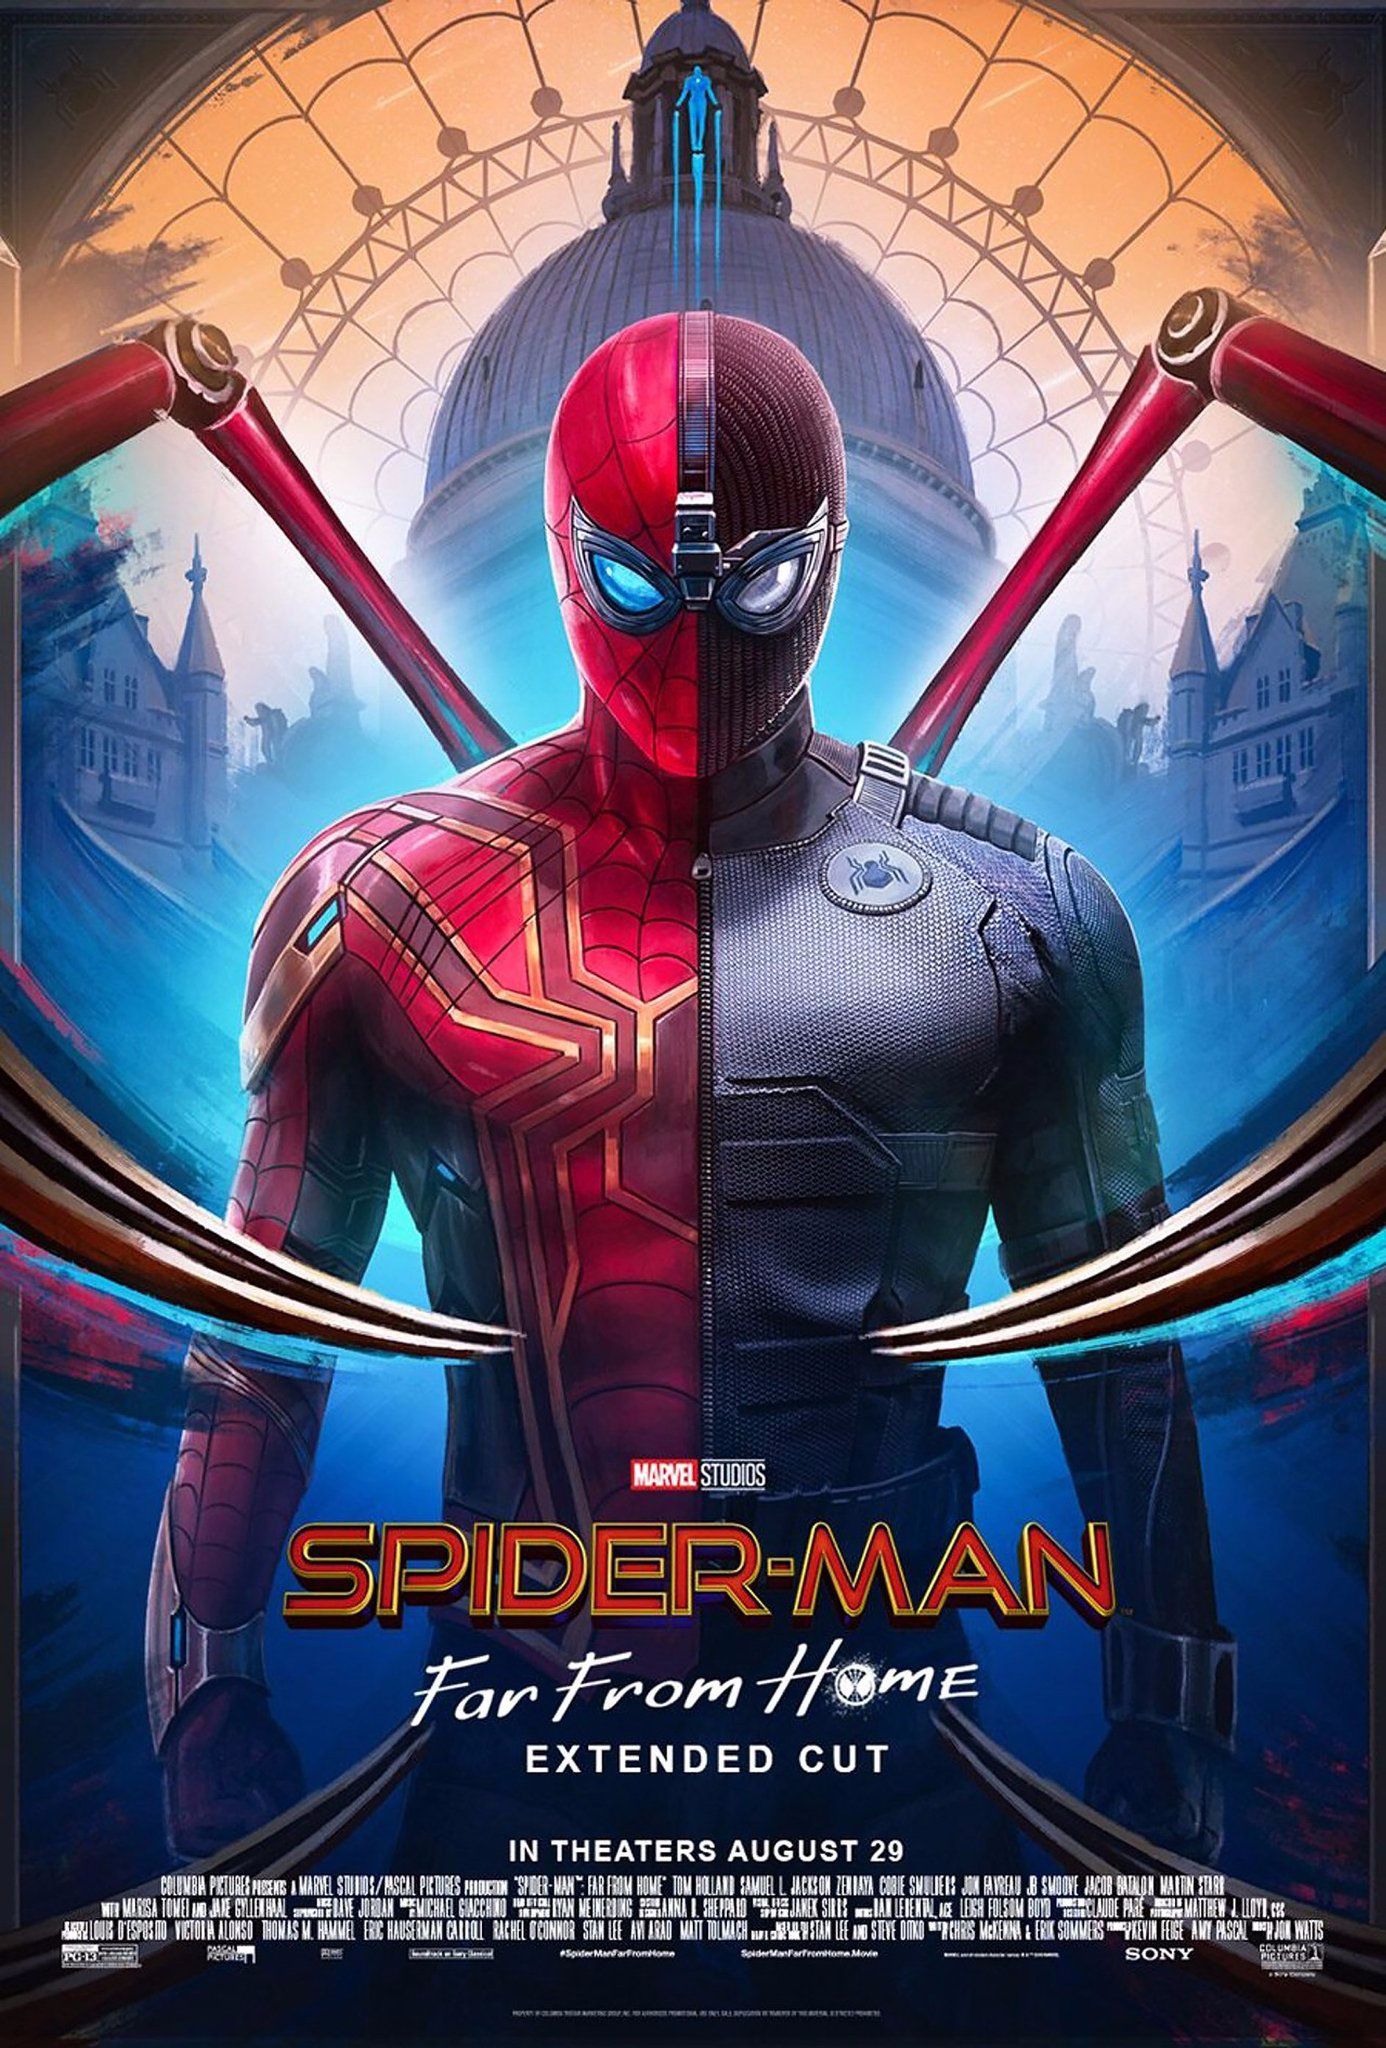 Spider-Man Far From Home Extended Cut Poster